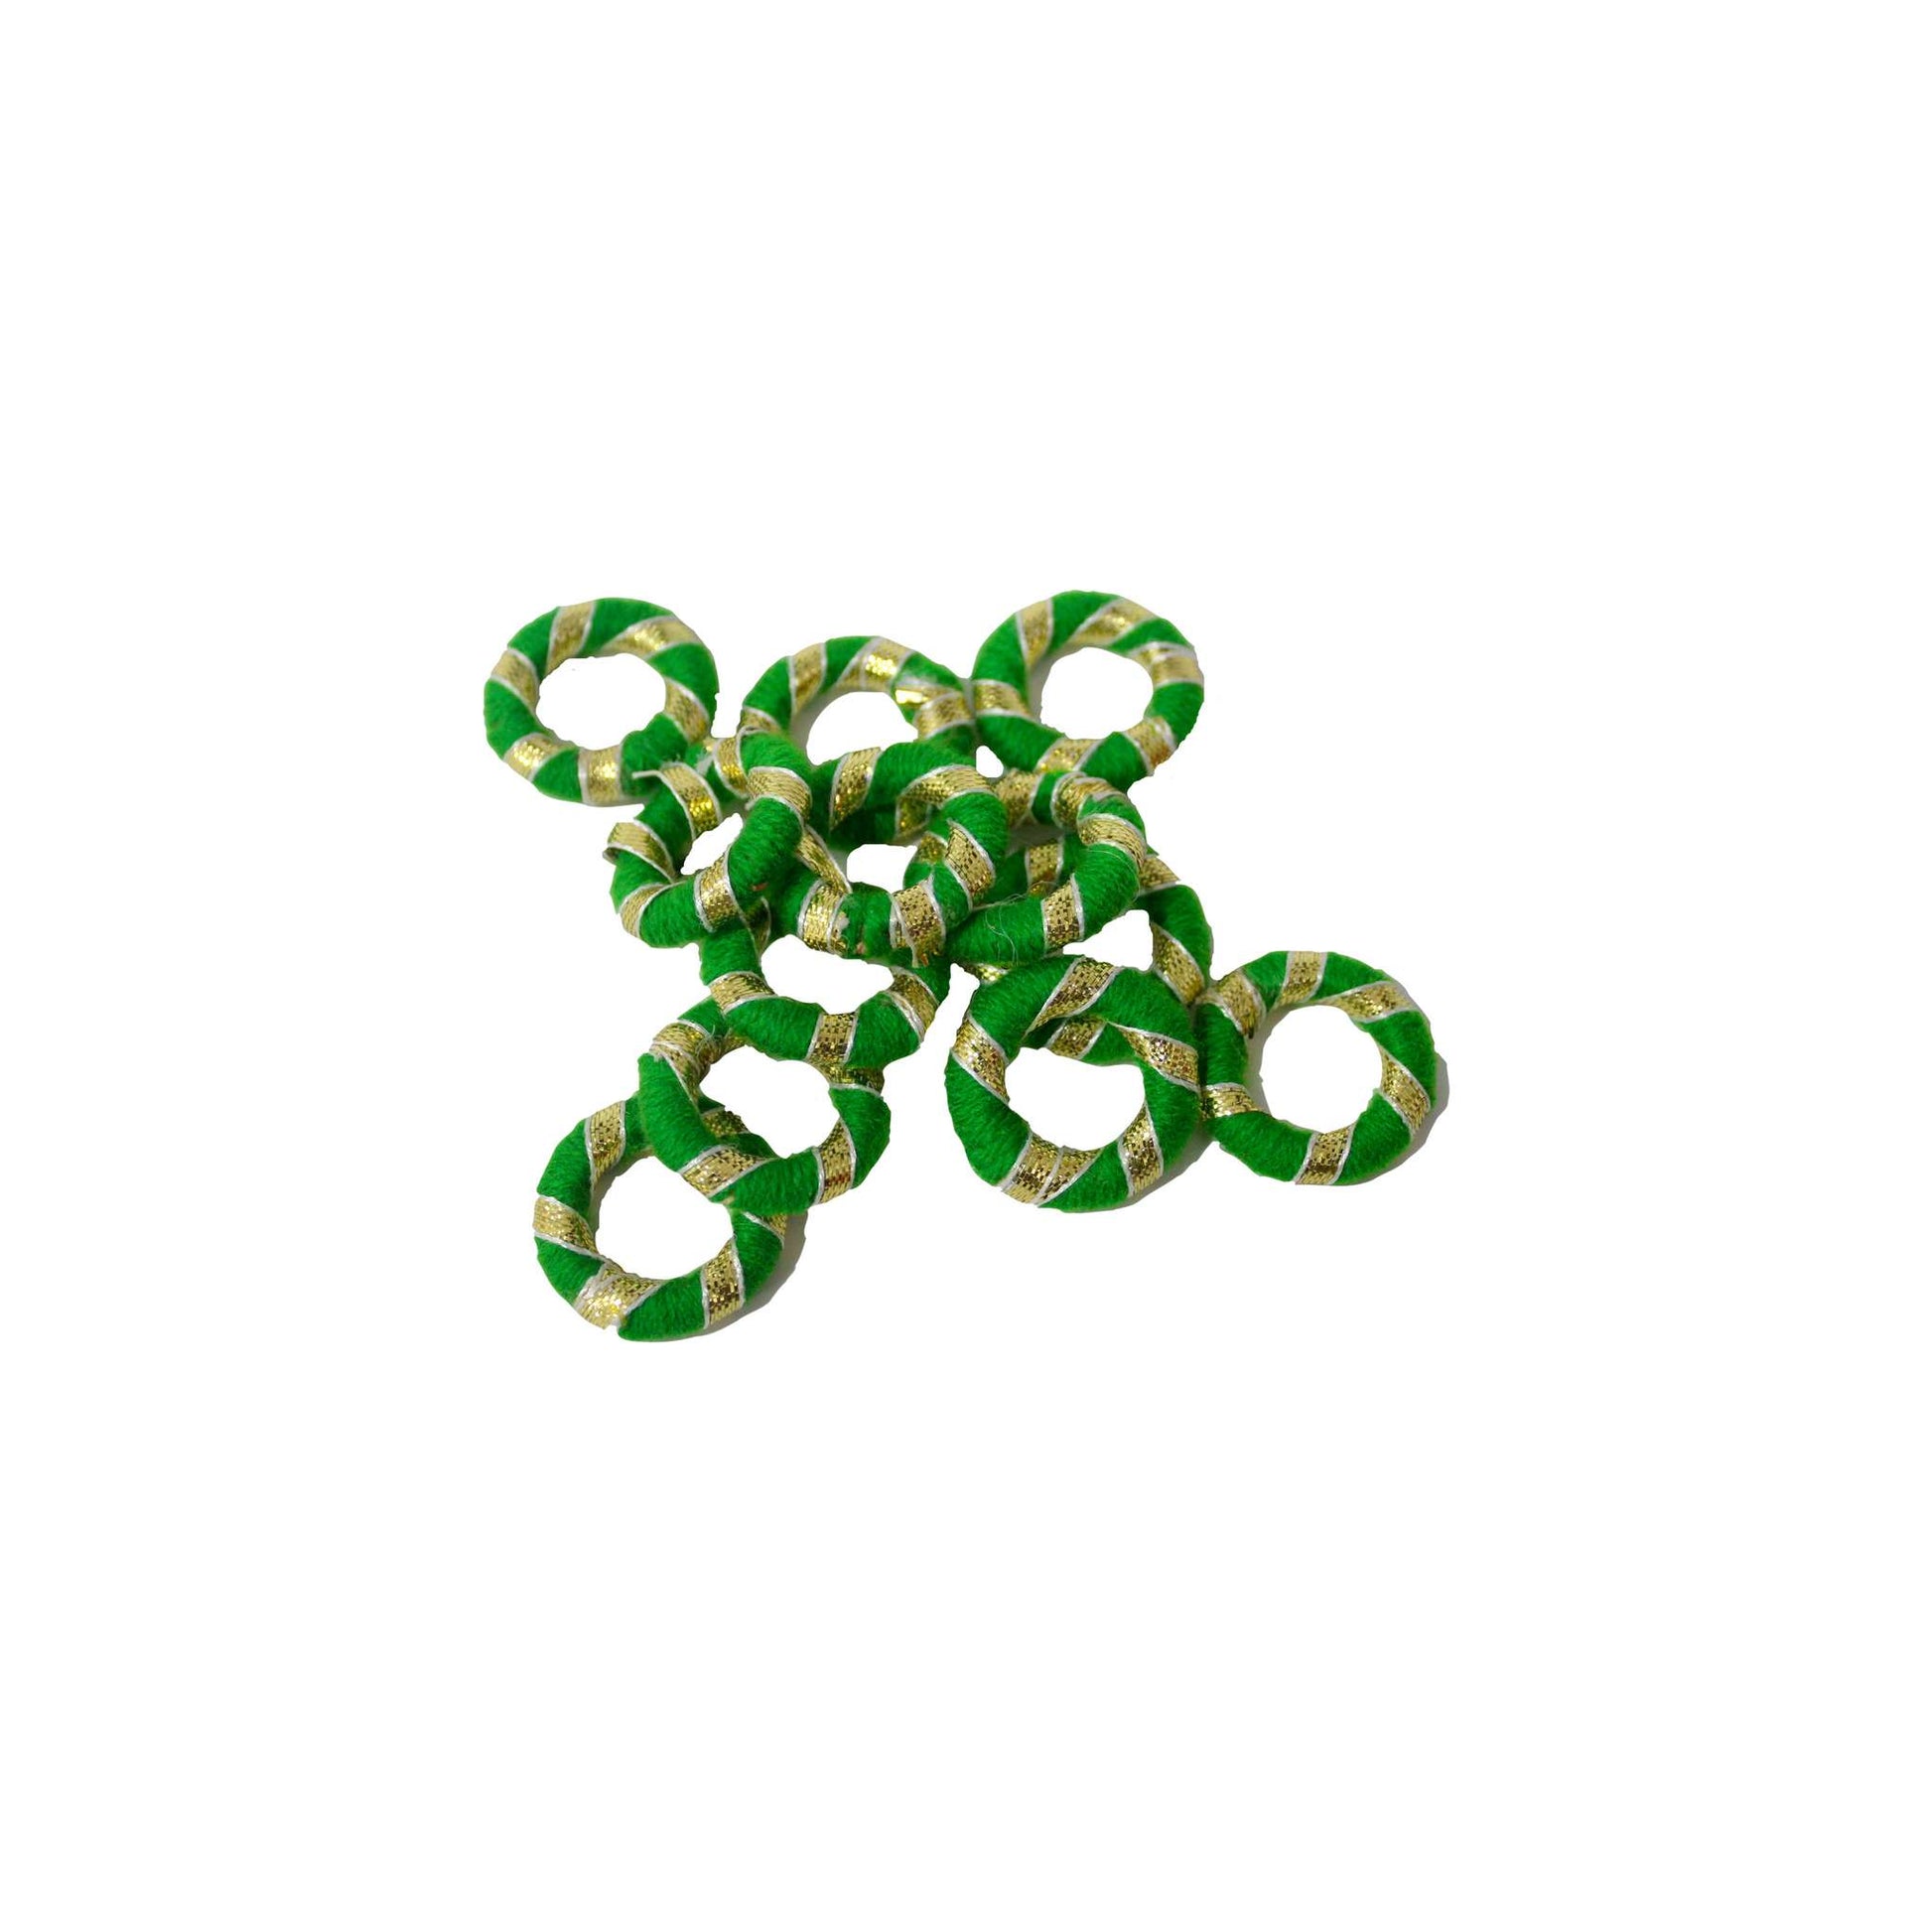 Indian Petals Threaded Round Bangle with Gota Motif for Craft Trousseau Packing Decoration - Design 552, Small, Green